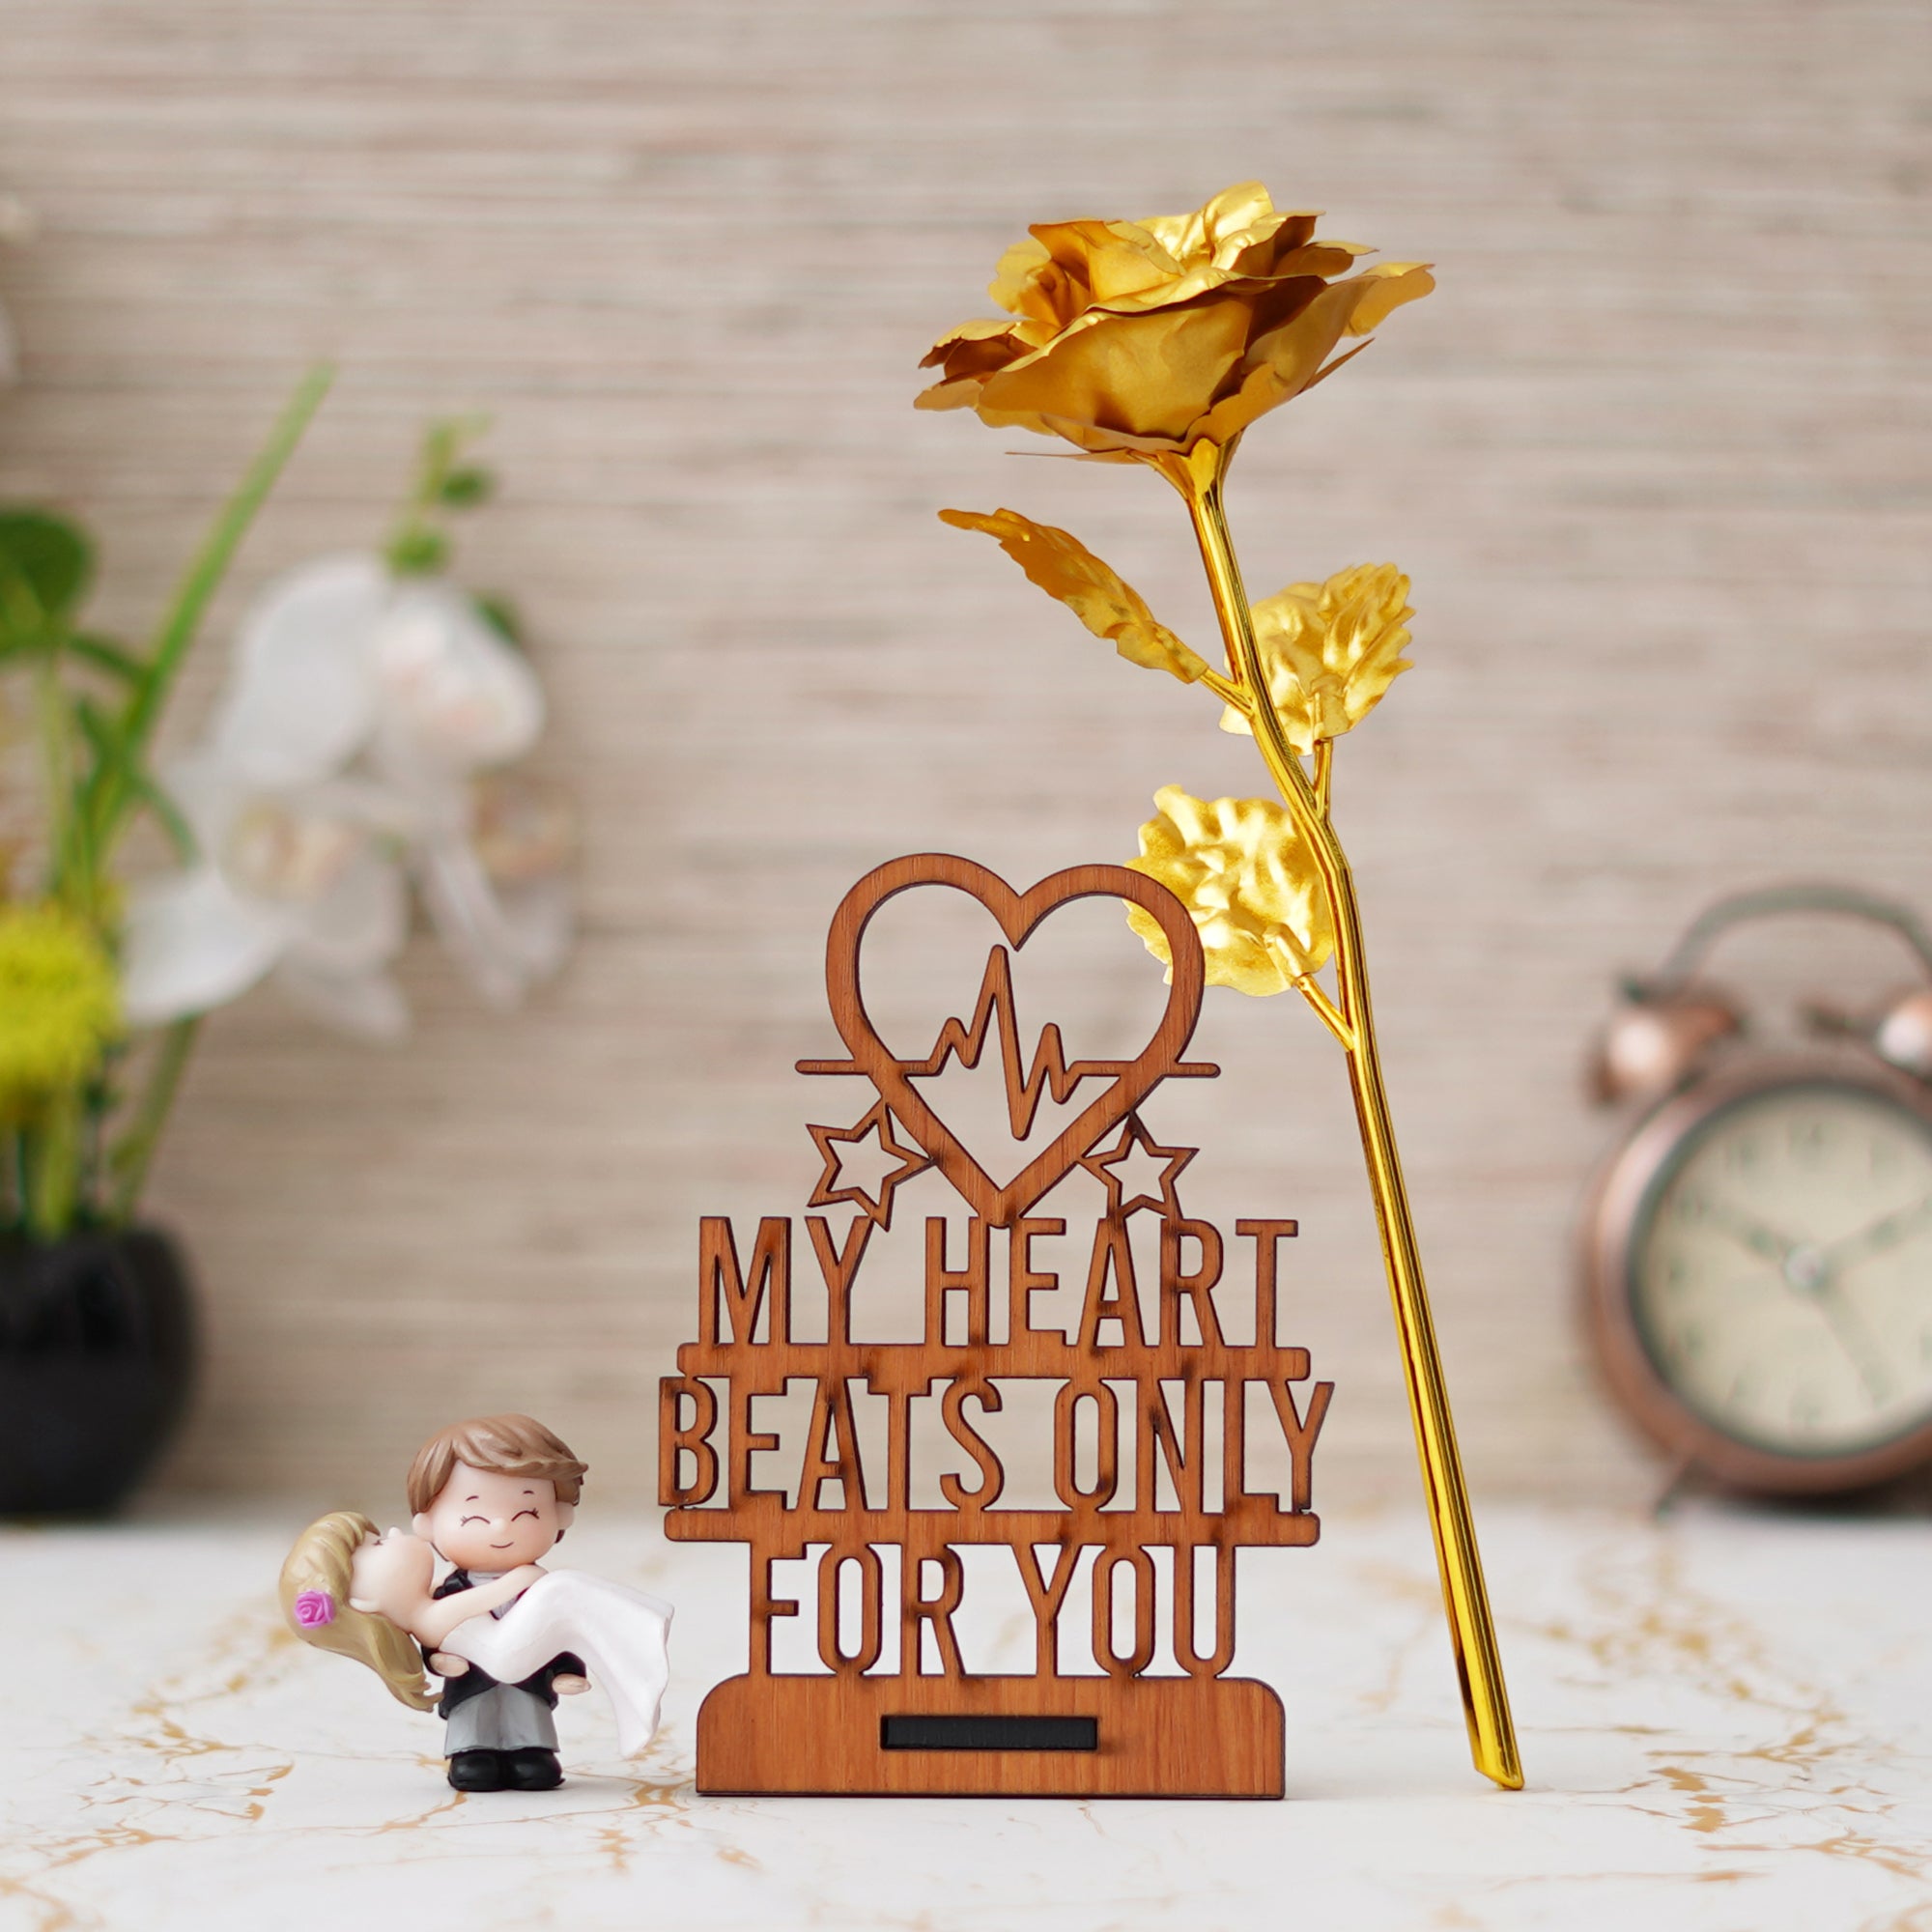 Valentine Combo of Golden Rose Gift Set, "My Heart Beats Only For You" Wooden Showpiece With Stand, Bride Kissing Groom Romantic Polyresin Decorative Showpiece